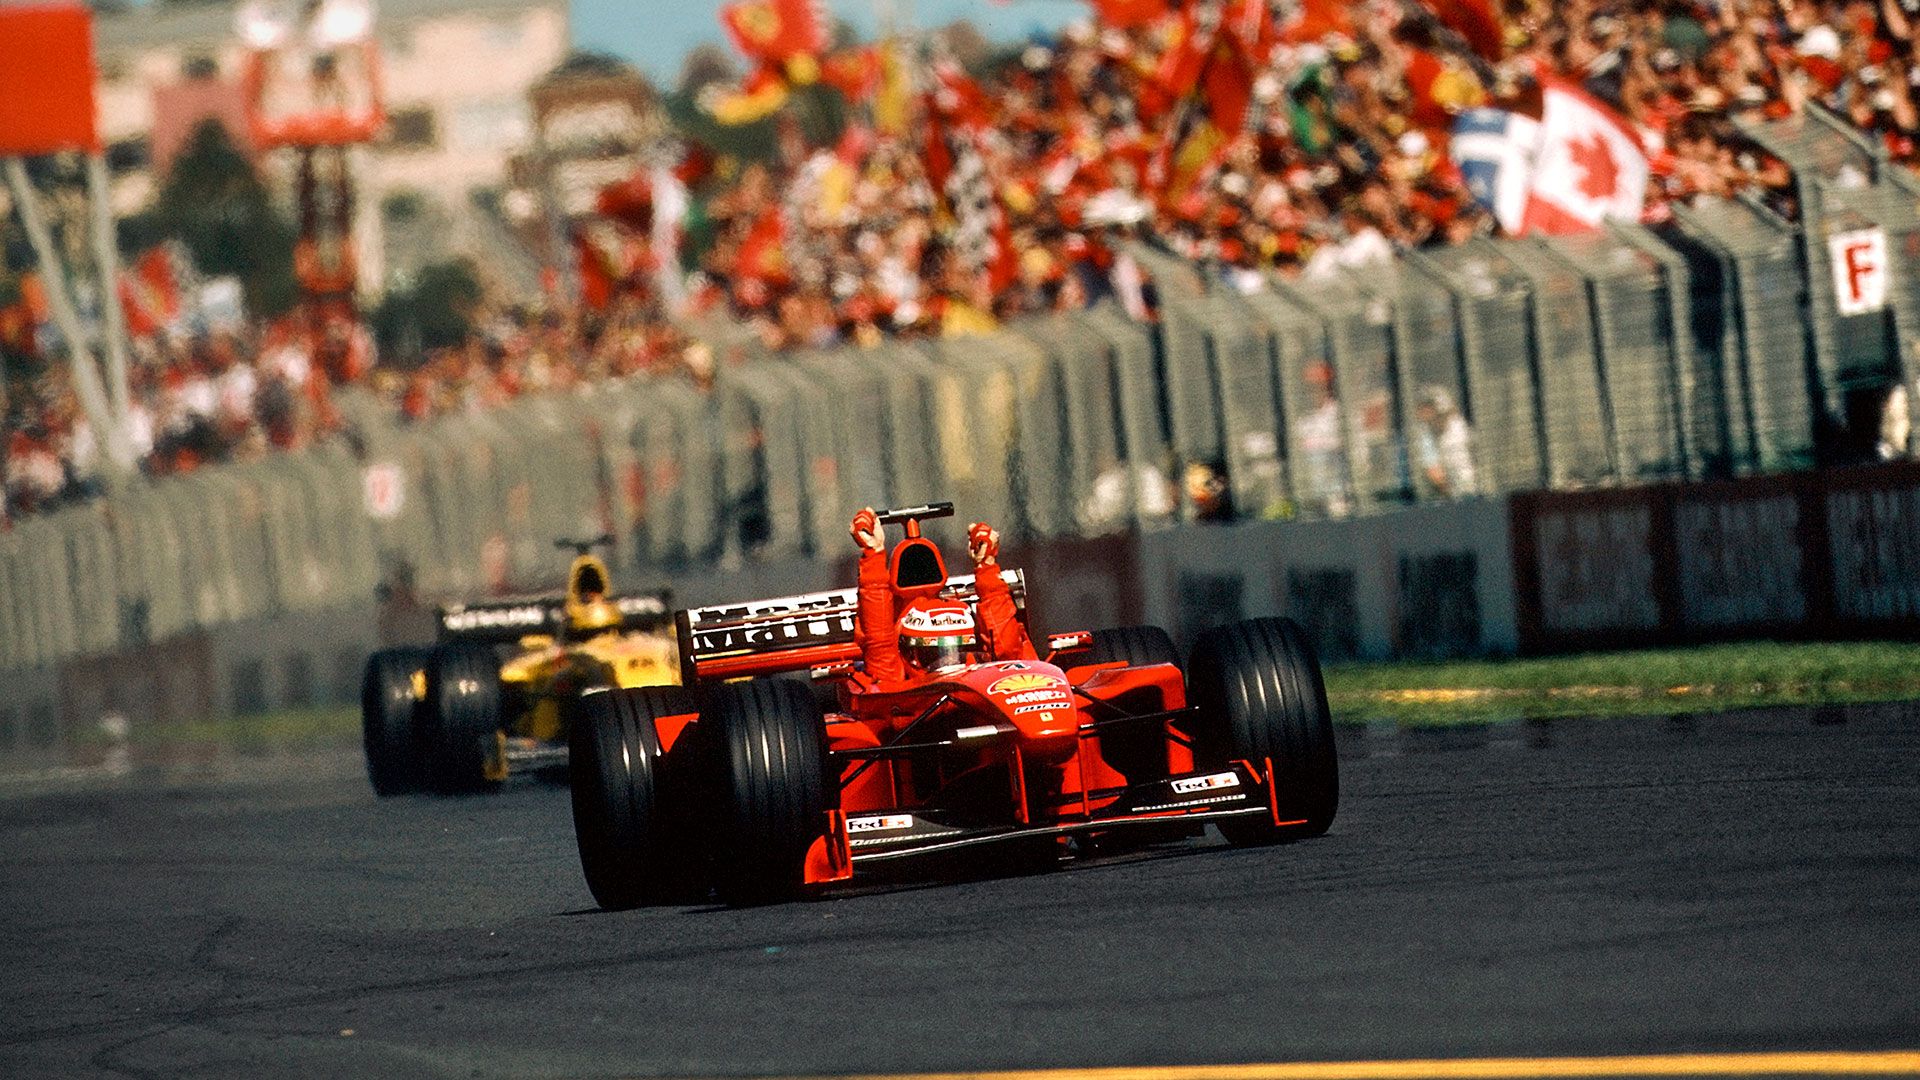 VOTE: Pick which classic Grand Prix you want us to stream next Wednesday. Formula 1®